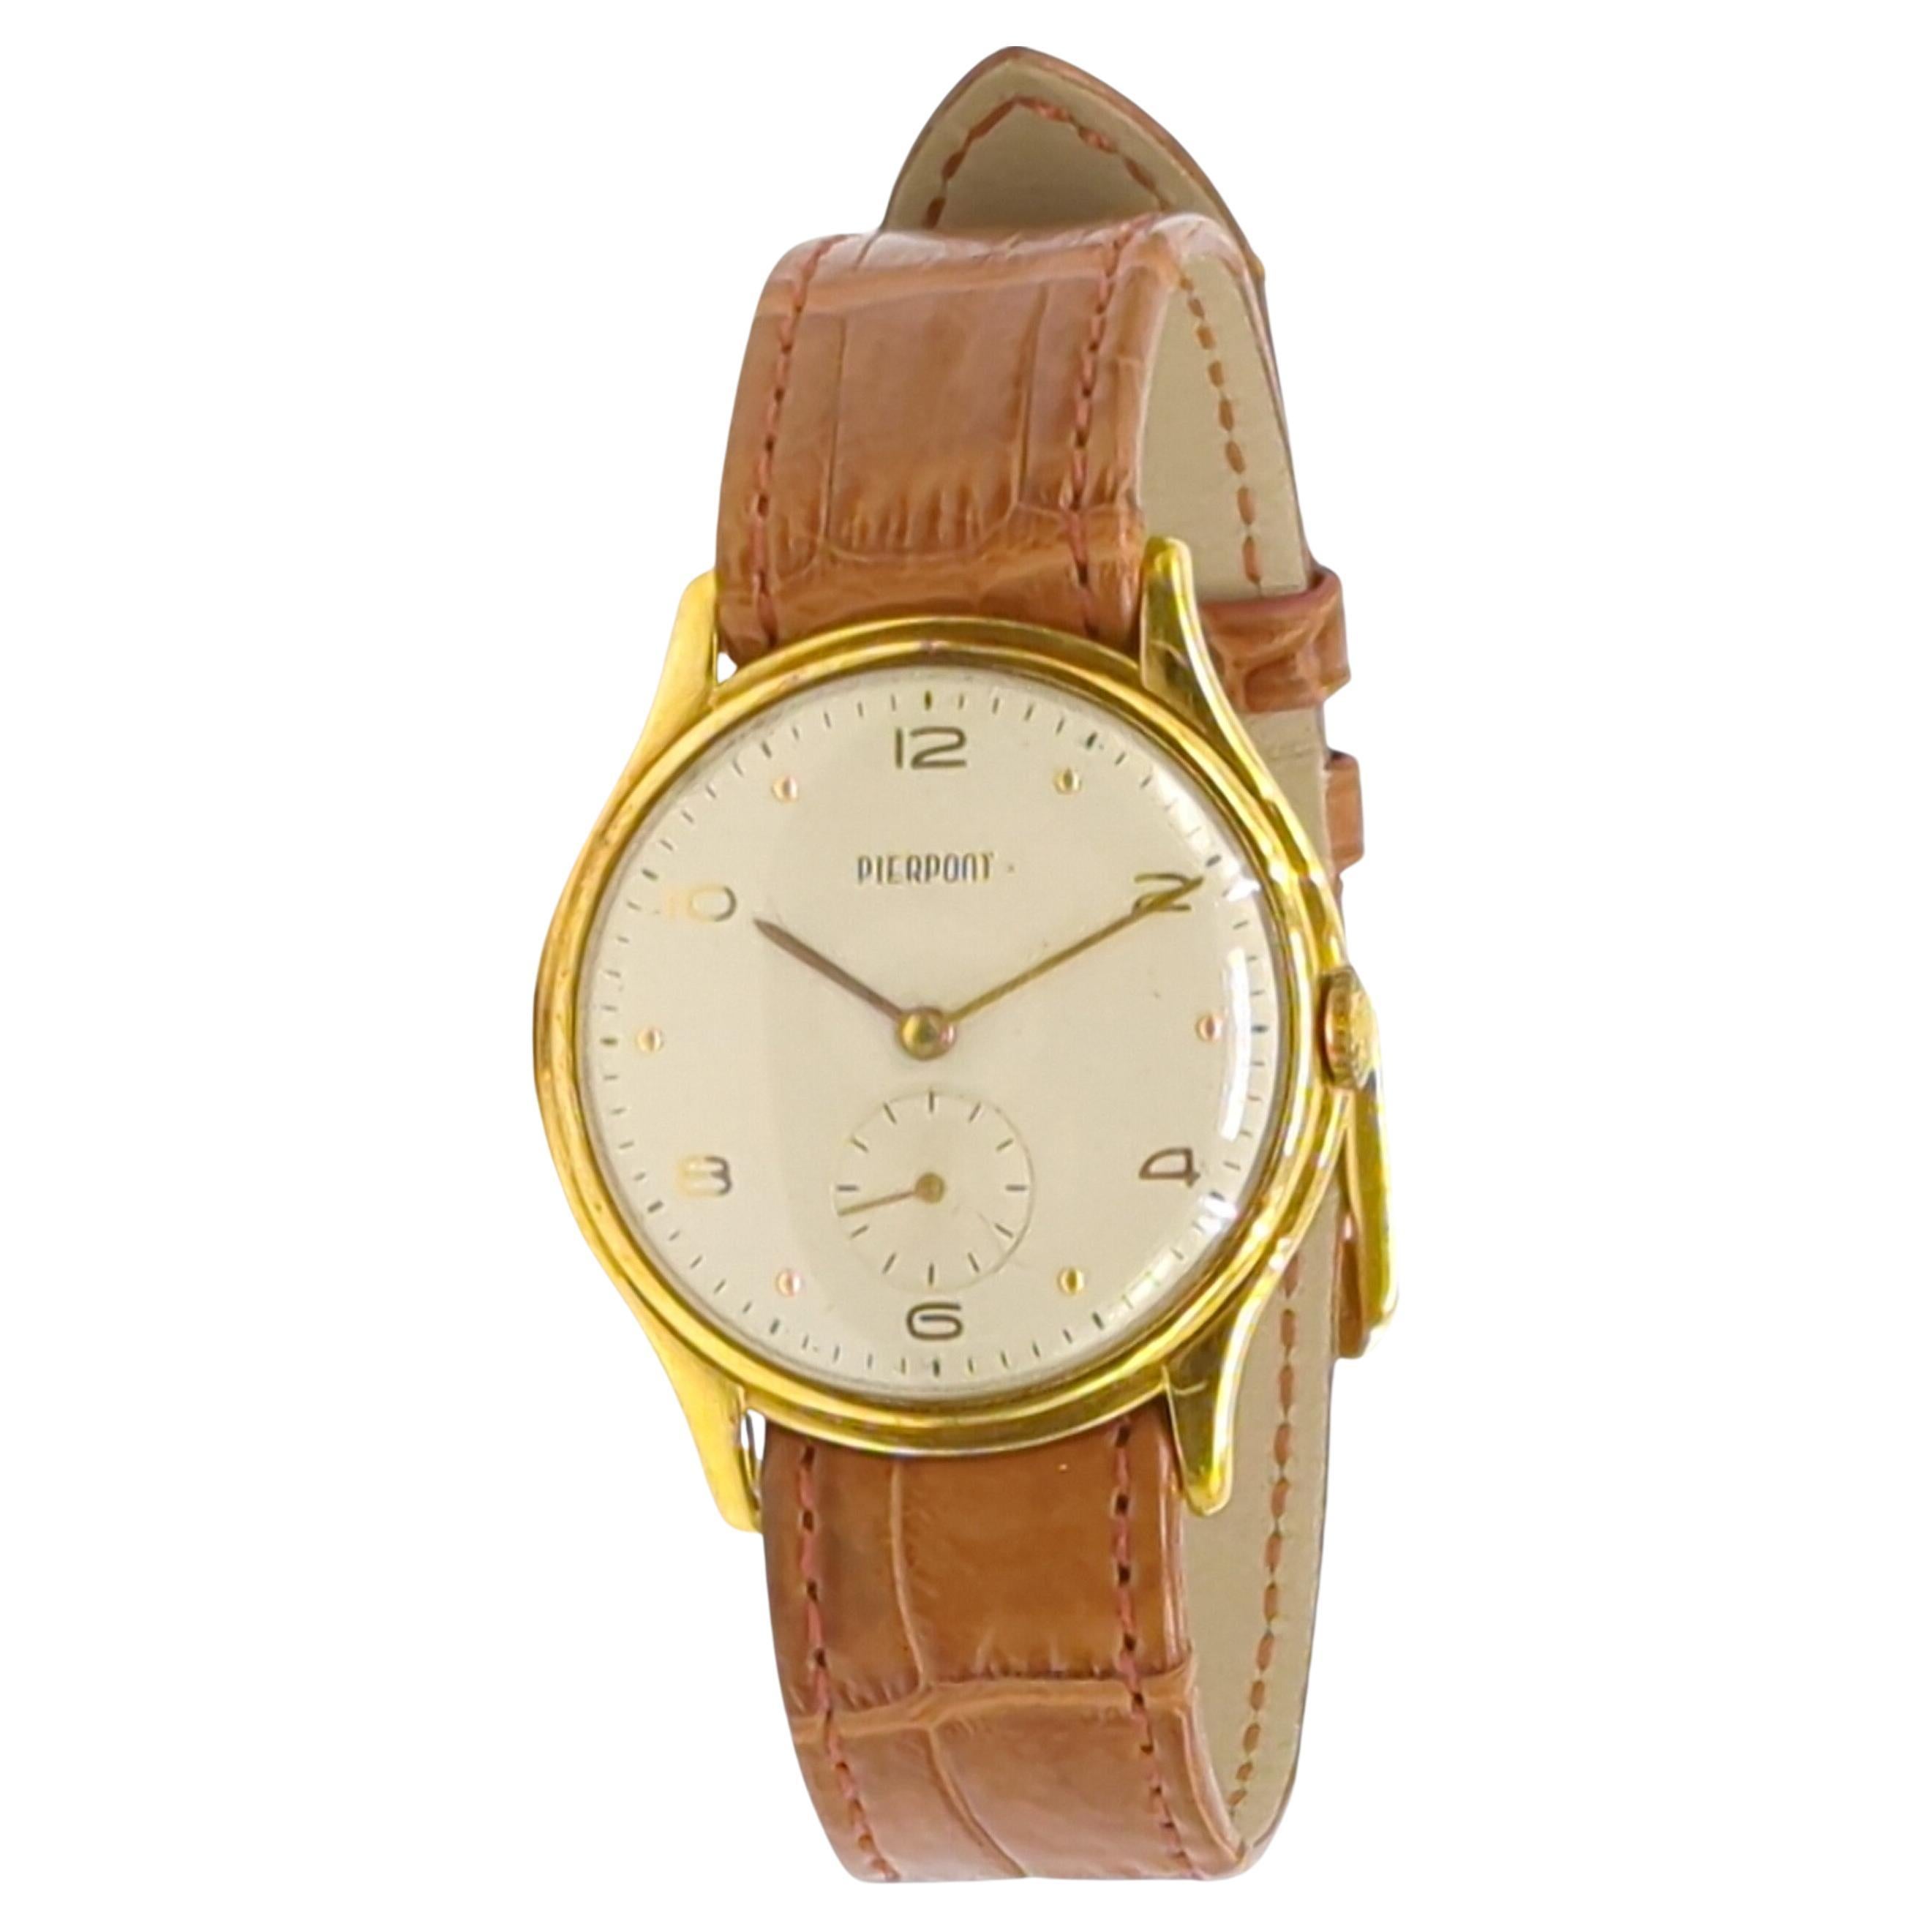 Rare 40s Pierpont 18k Solid Yellow Gold Subdial Dress Watch New Brown Croco Band en vente